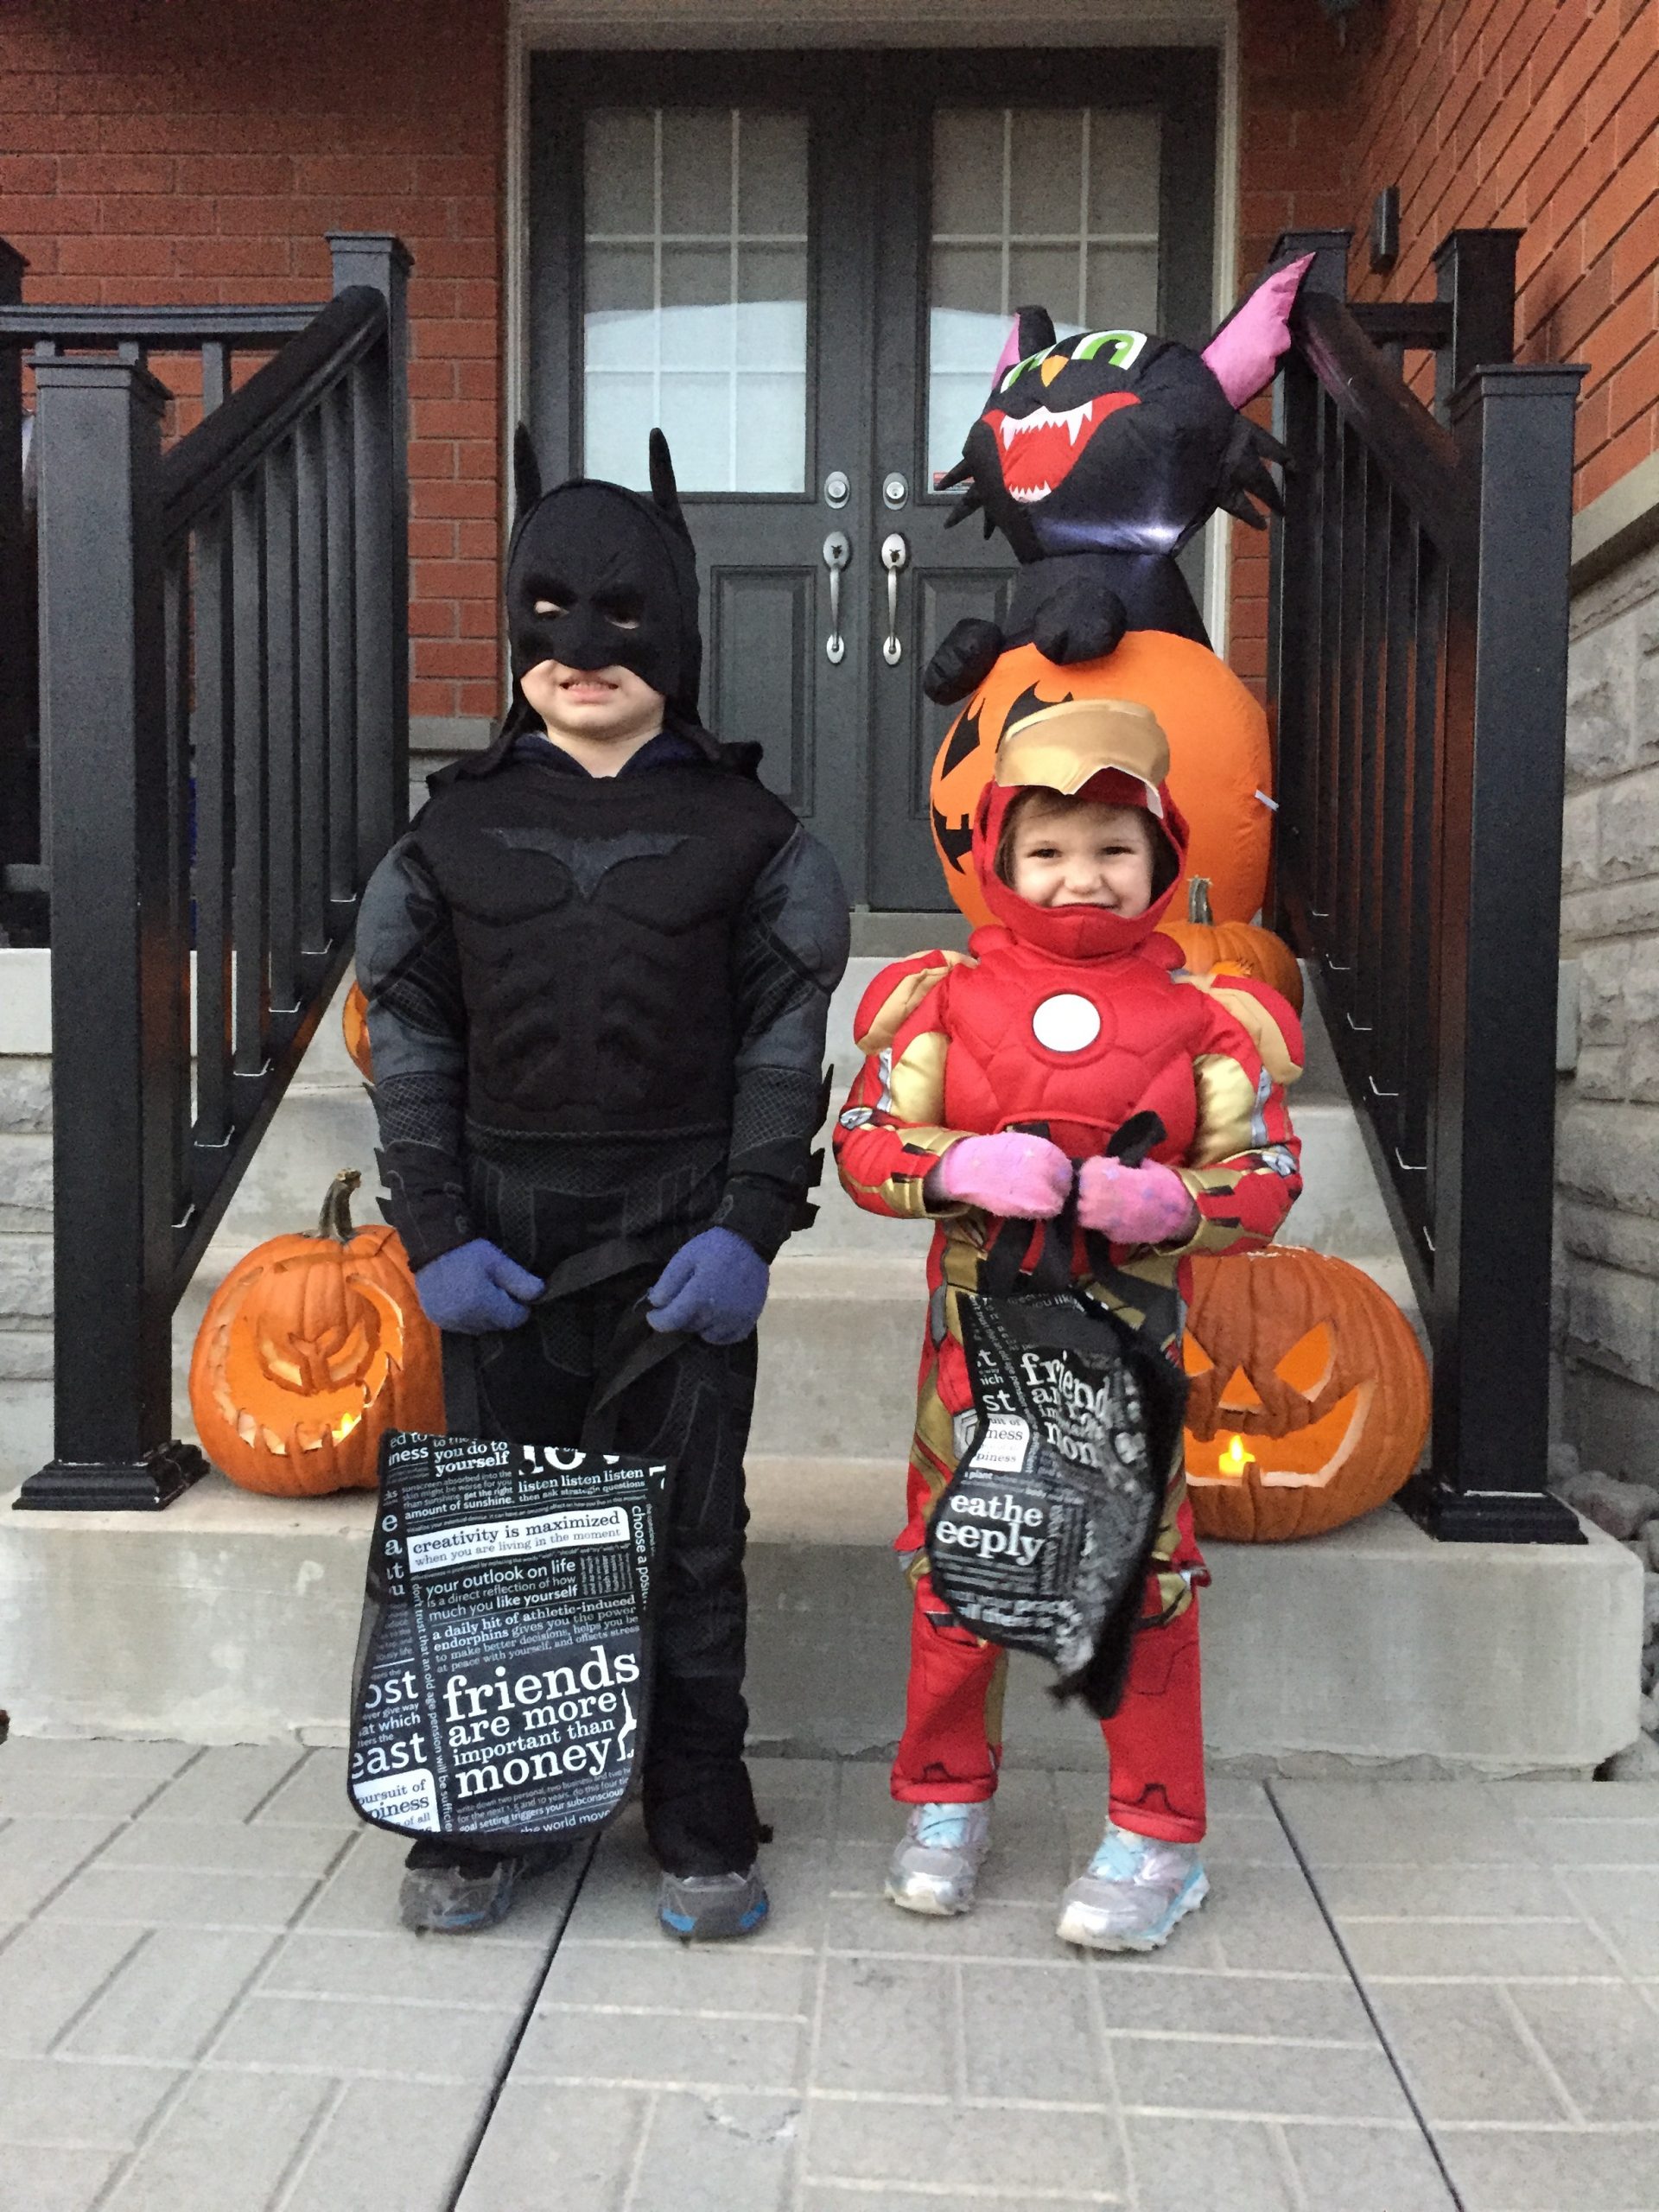 Mike Holmes' grandkids dressed up in Halloween costumes as Iron Man and Batman